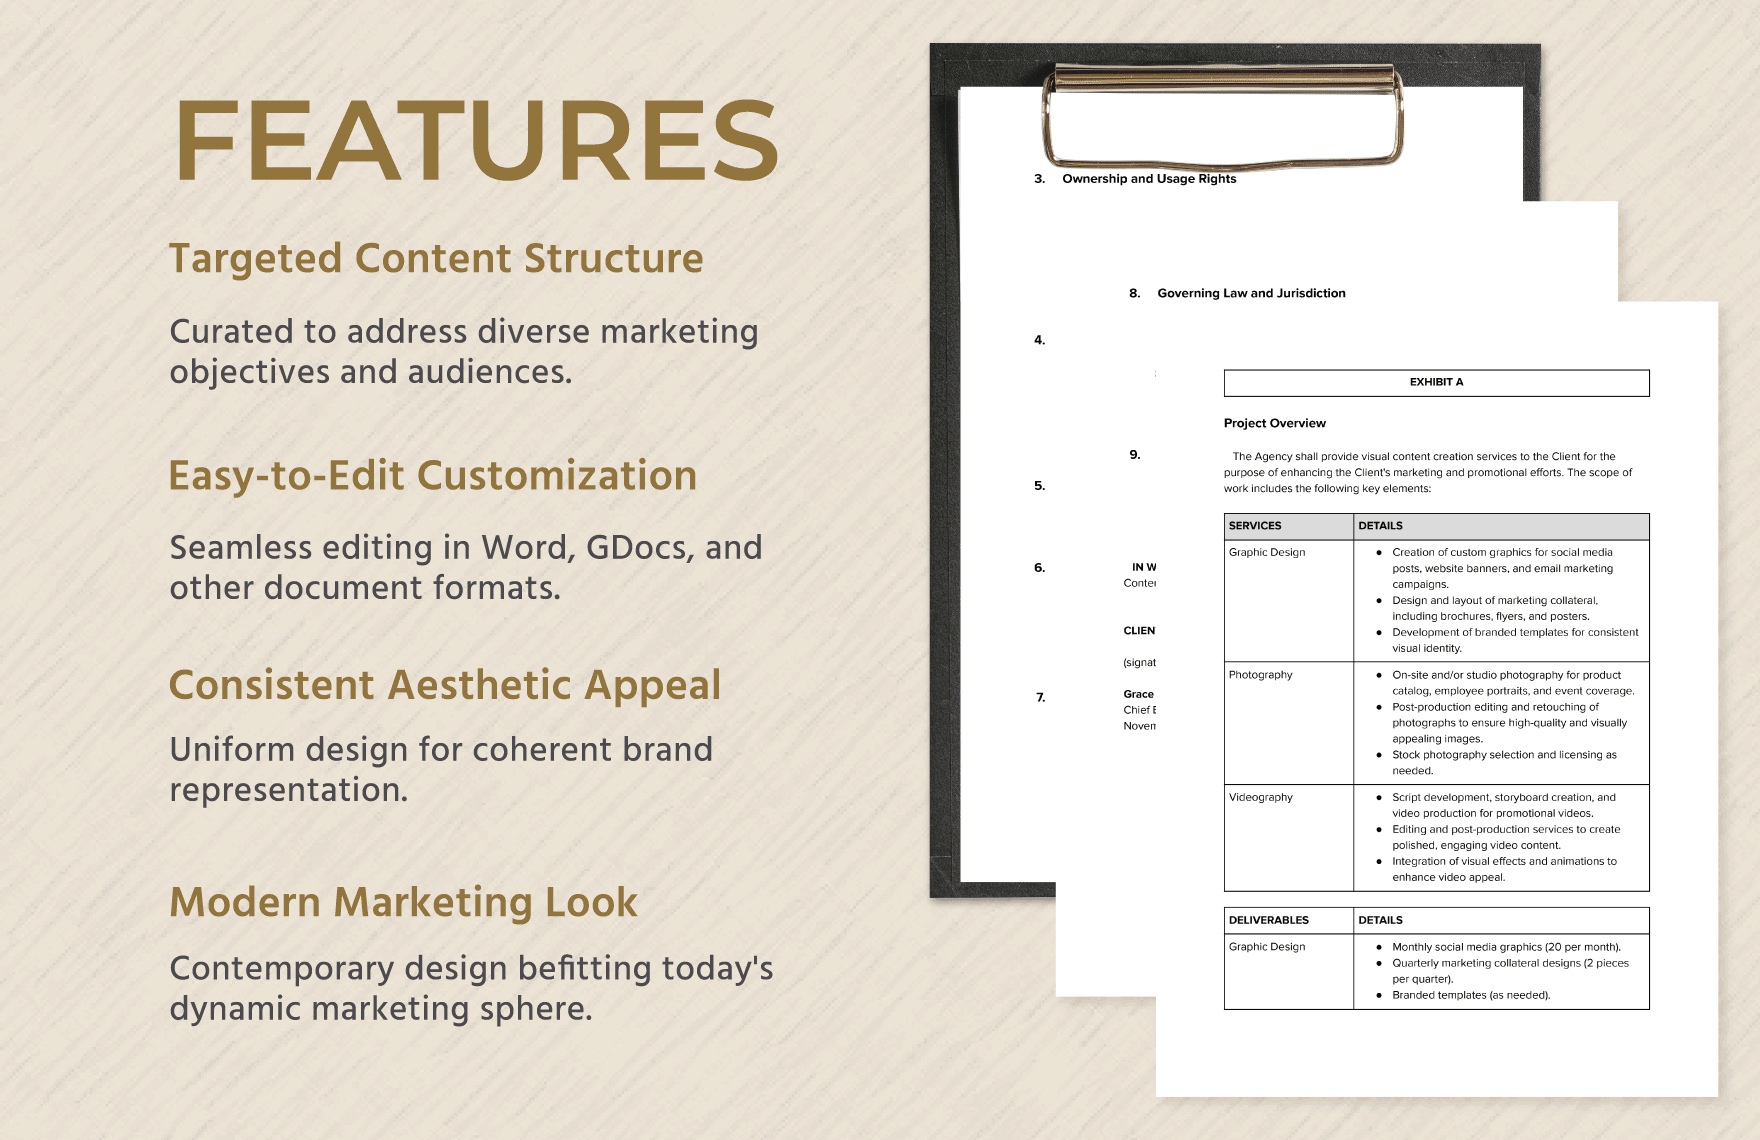 Marketing Visual Content Creation Contract Template